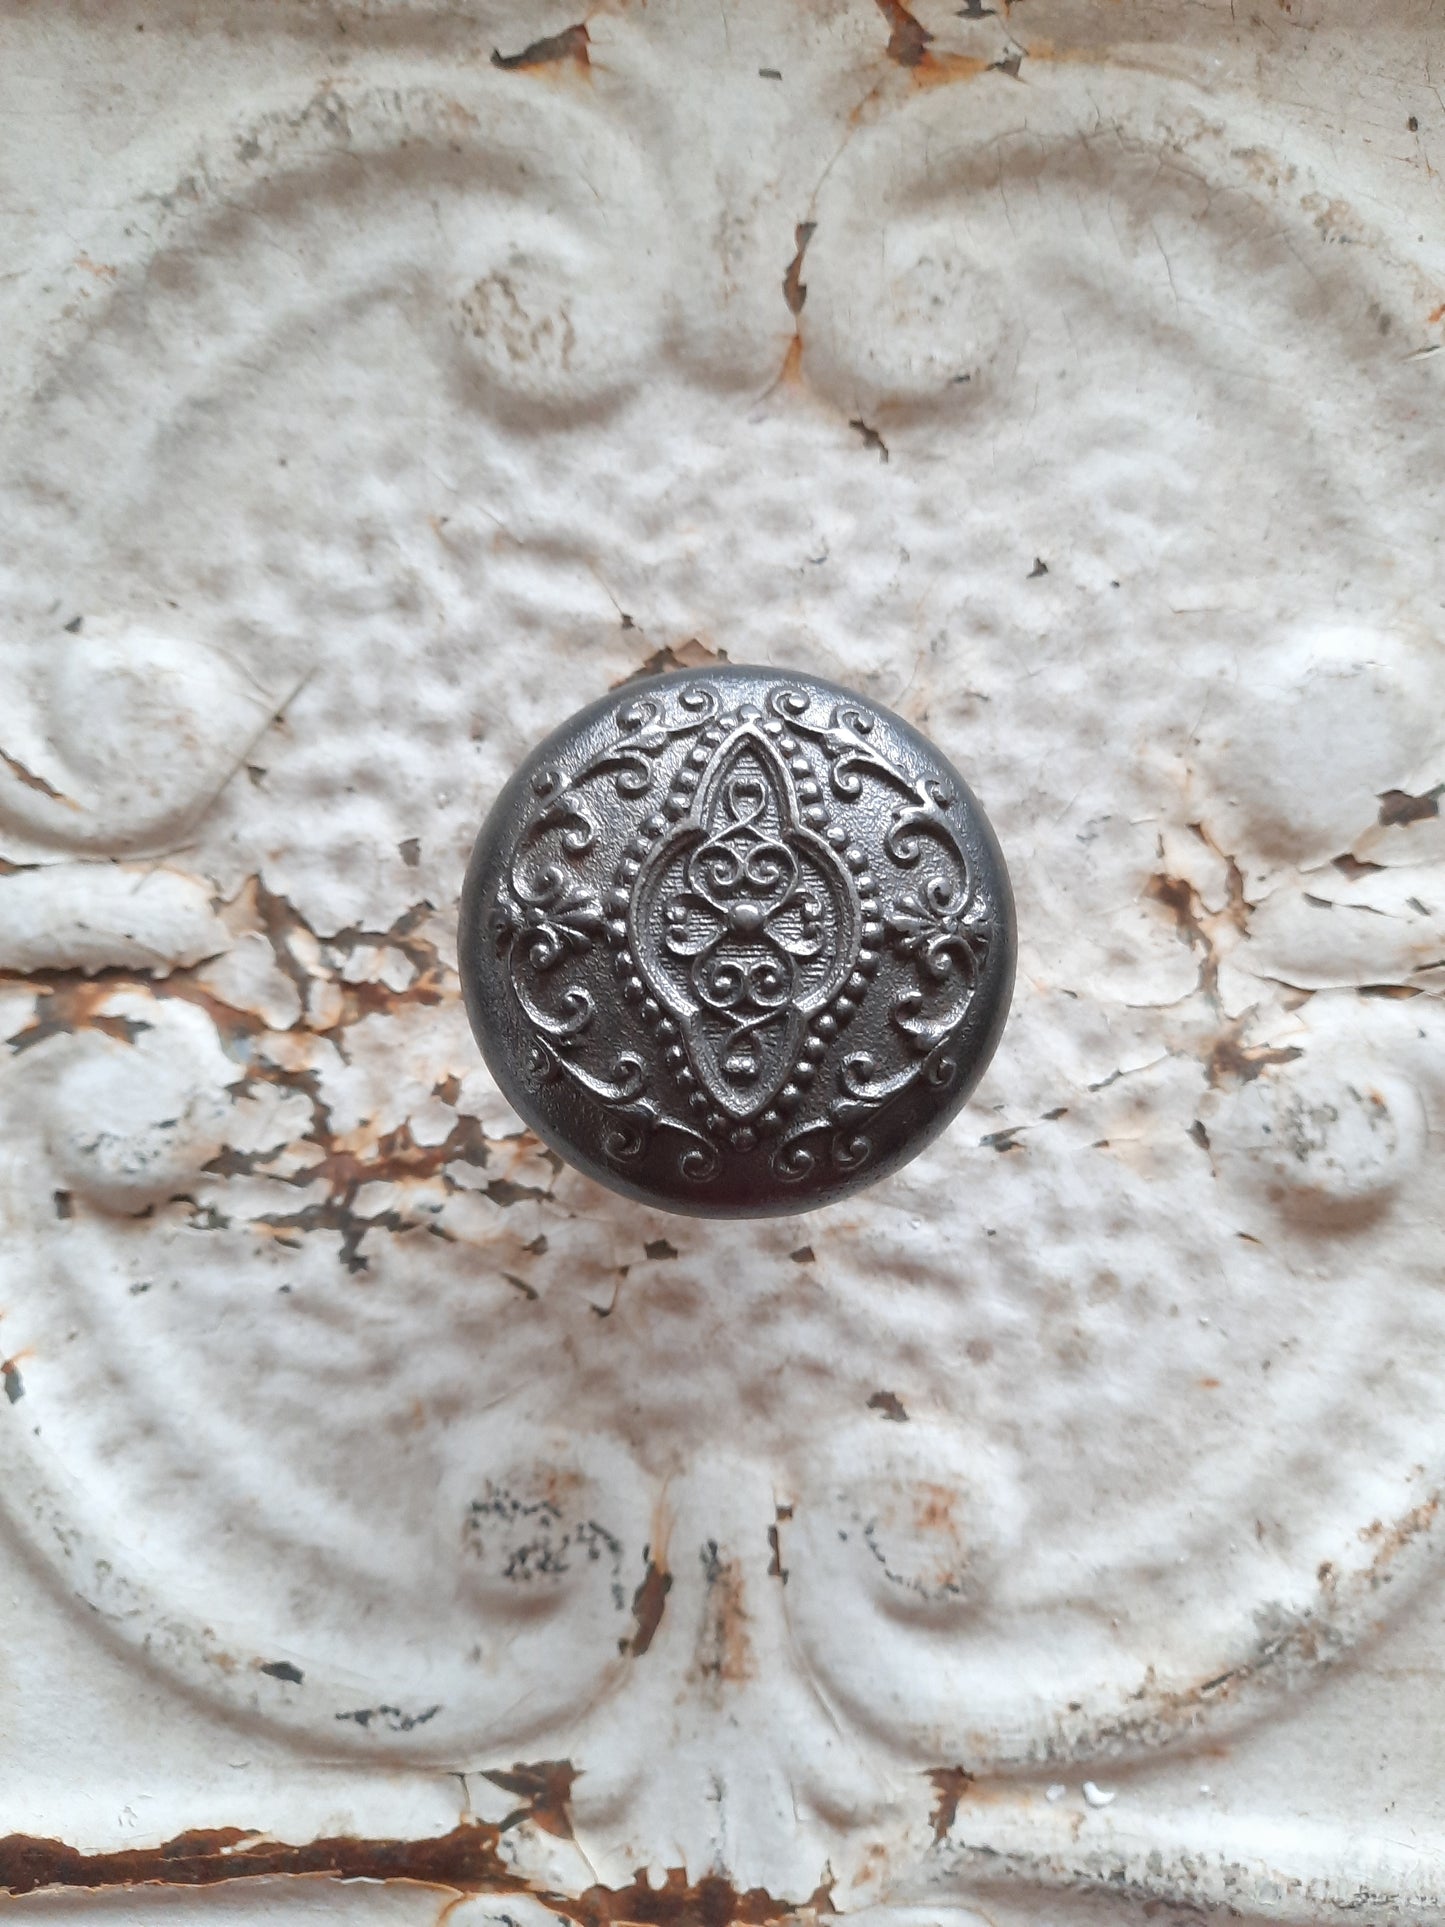 Yale and Towne Cast Iron Eastlake or Vernacular Style Knob, Design Ornate Antique Doorknob F-205